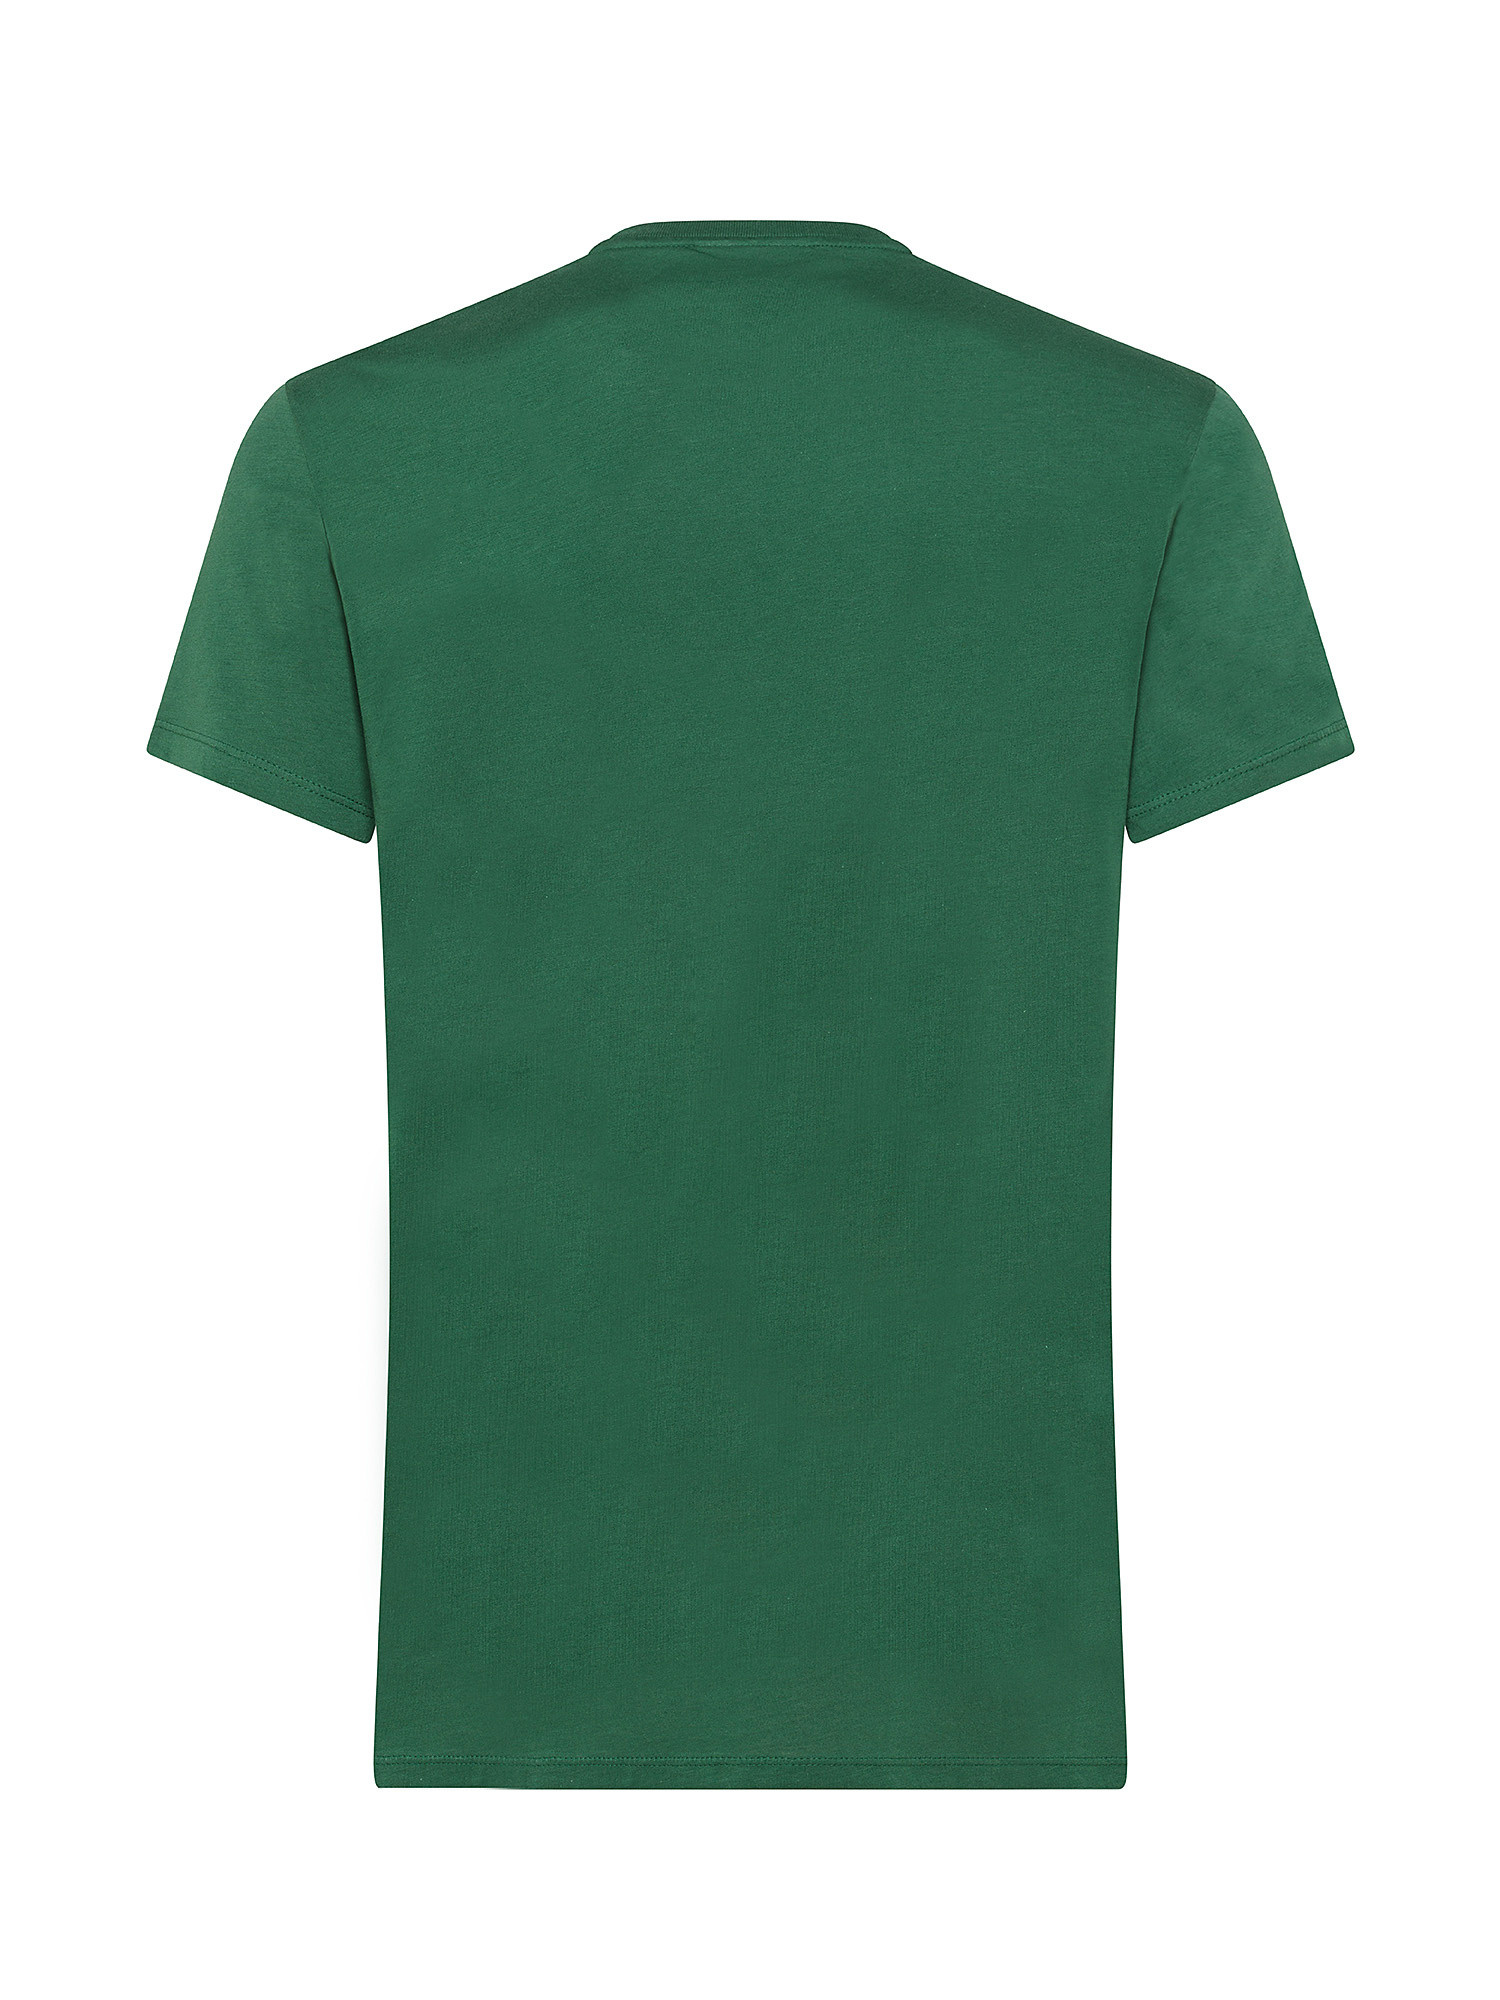 Lacoste - T-shirt girocollo in jersey di cotone Pima, Verde, large image number 1